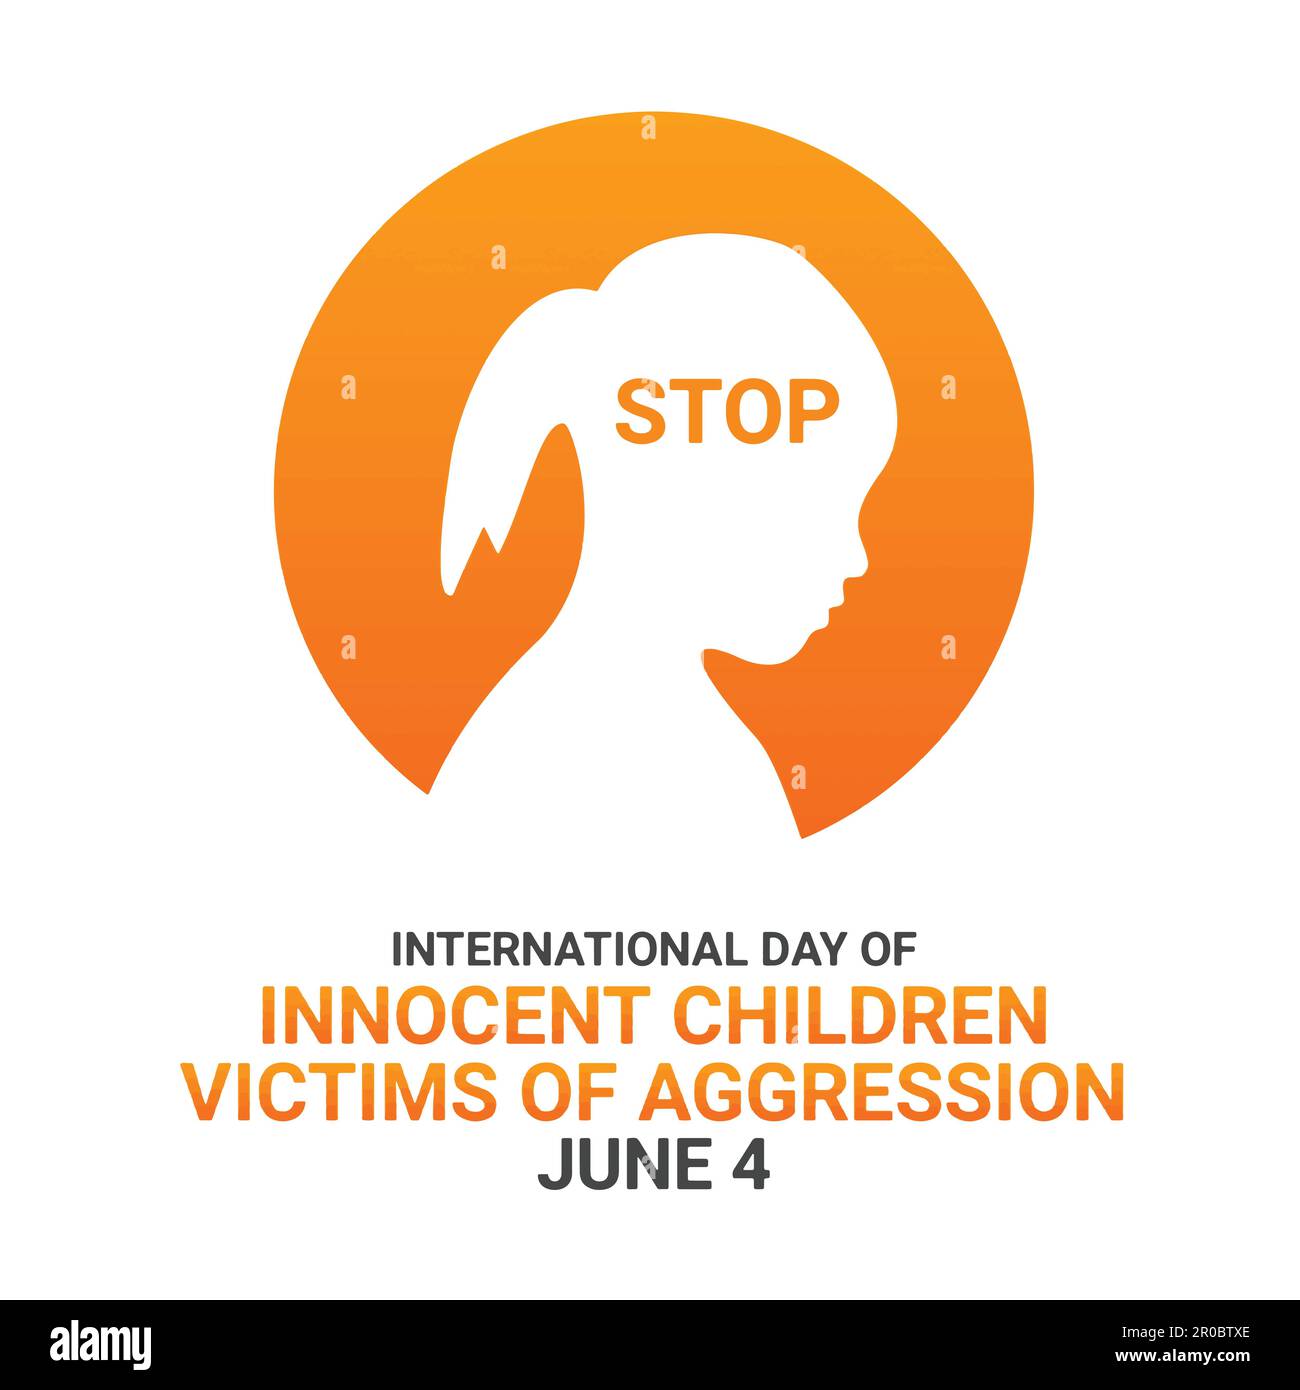 International Day Of Innocent Children Victims Of Aggression. June 4. Holiday concept. Template for background, banner, card, poster with text Stock Vector